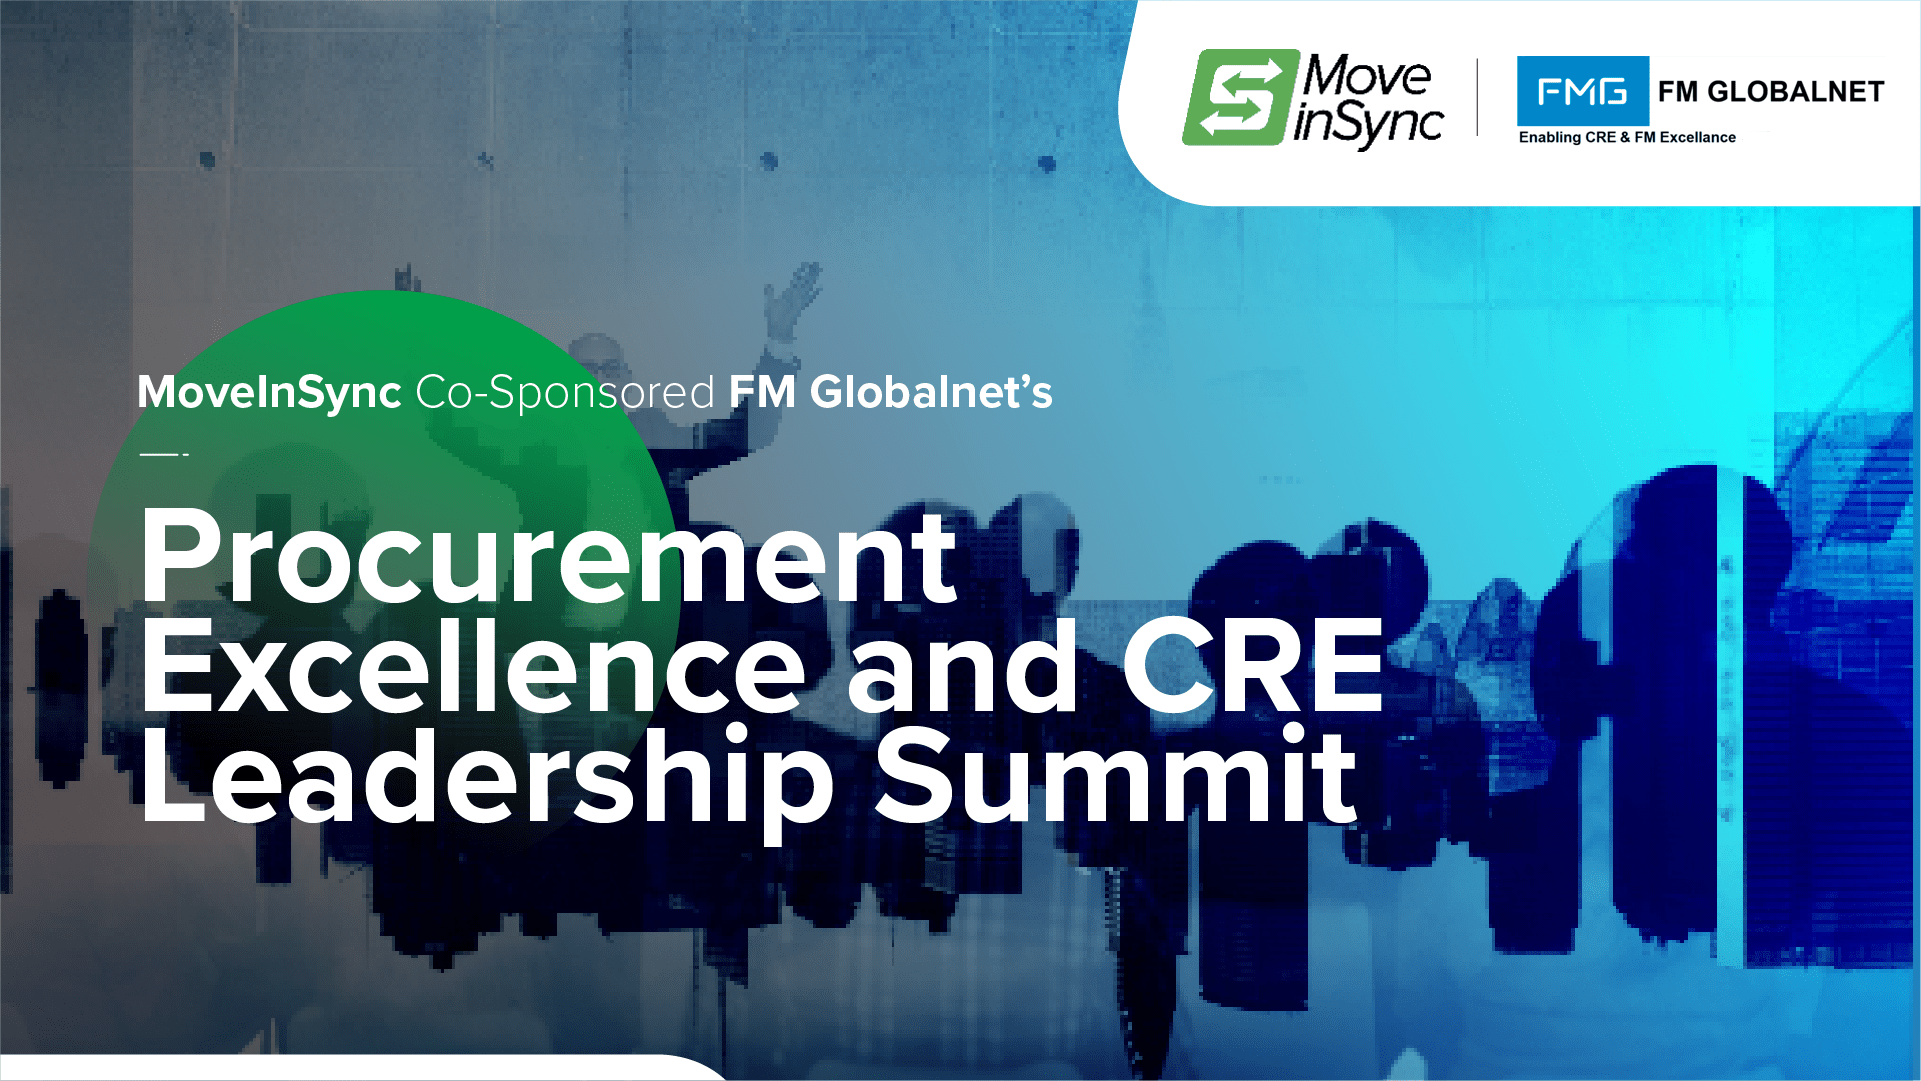 Procurement Excellence and CRE Leadership Summit